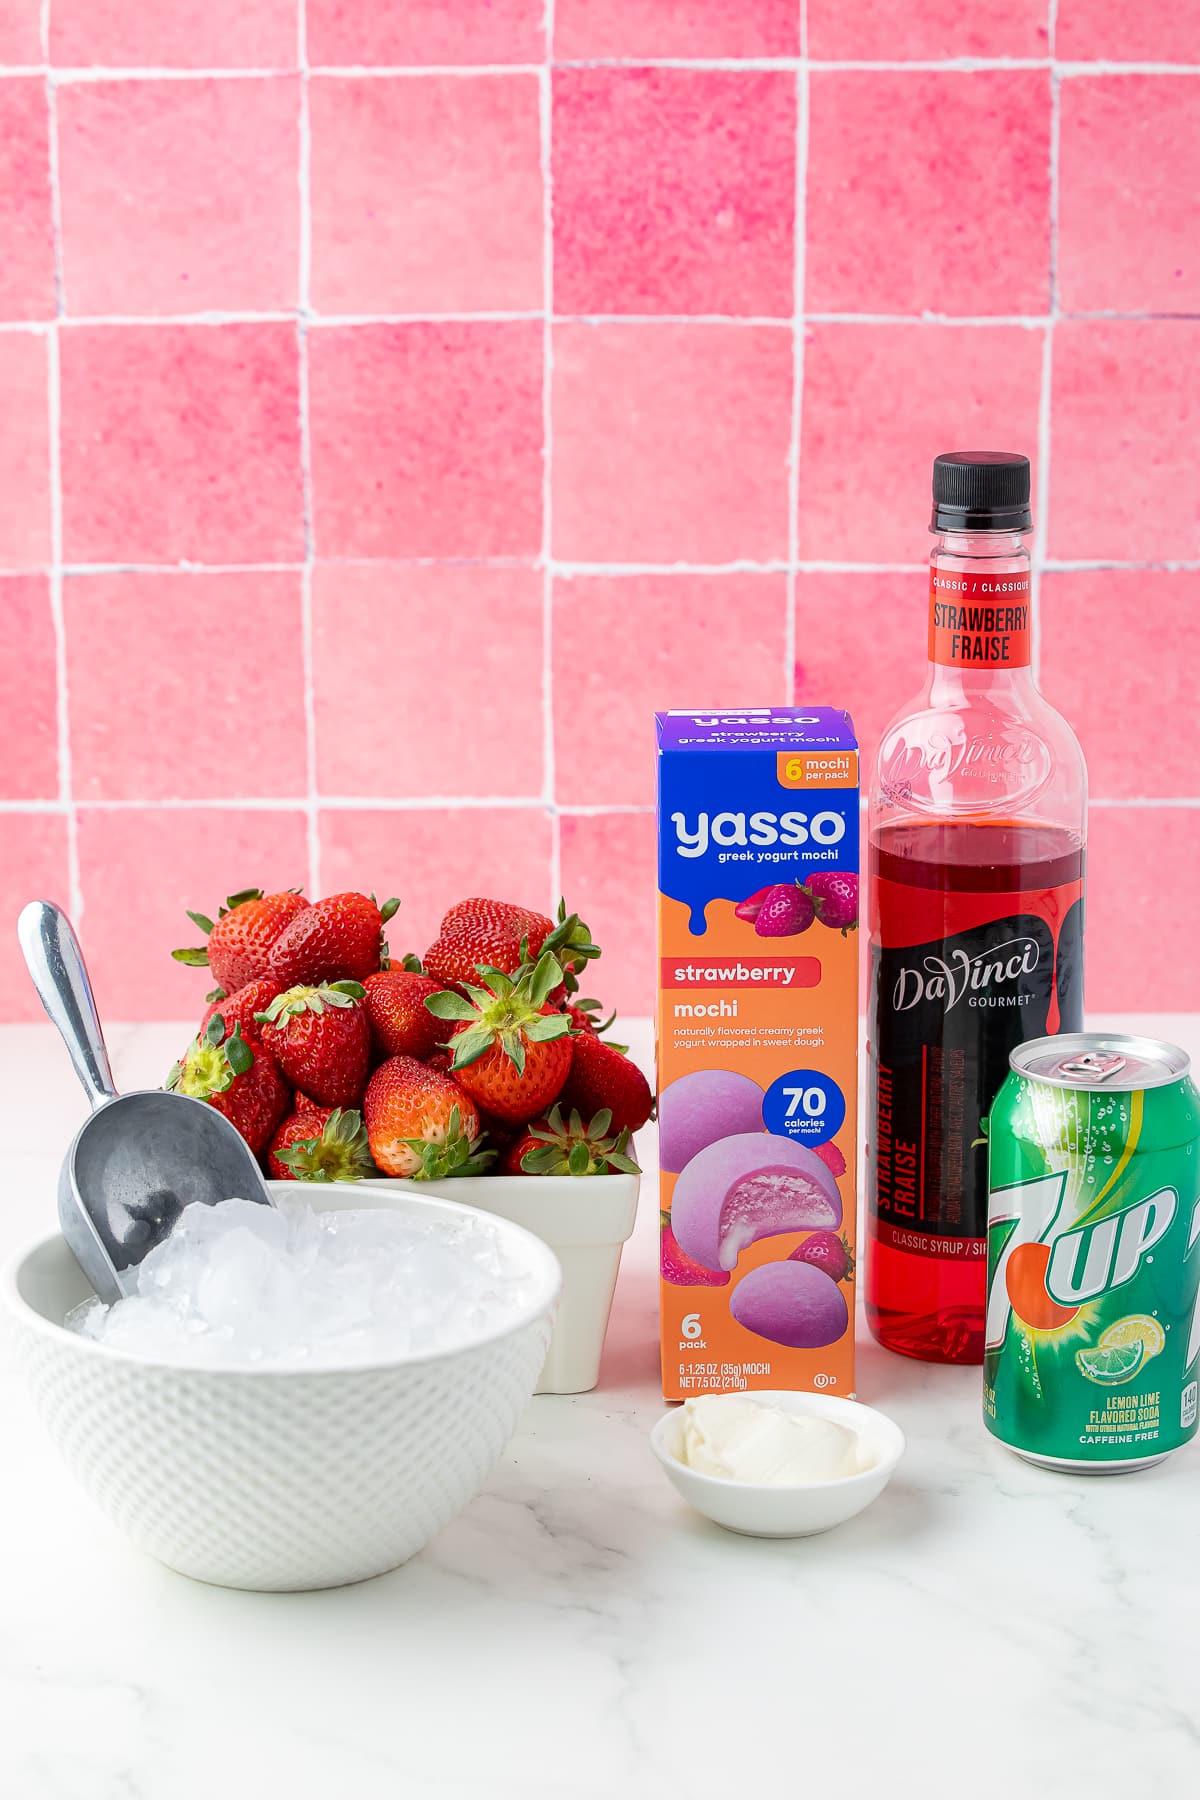 Ingredients for yassopink drink with strawberries, crushed ice, yasso mochi, strawberry syrup, 7up and greek yogurt on a white counter with pink backsplash